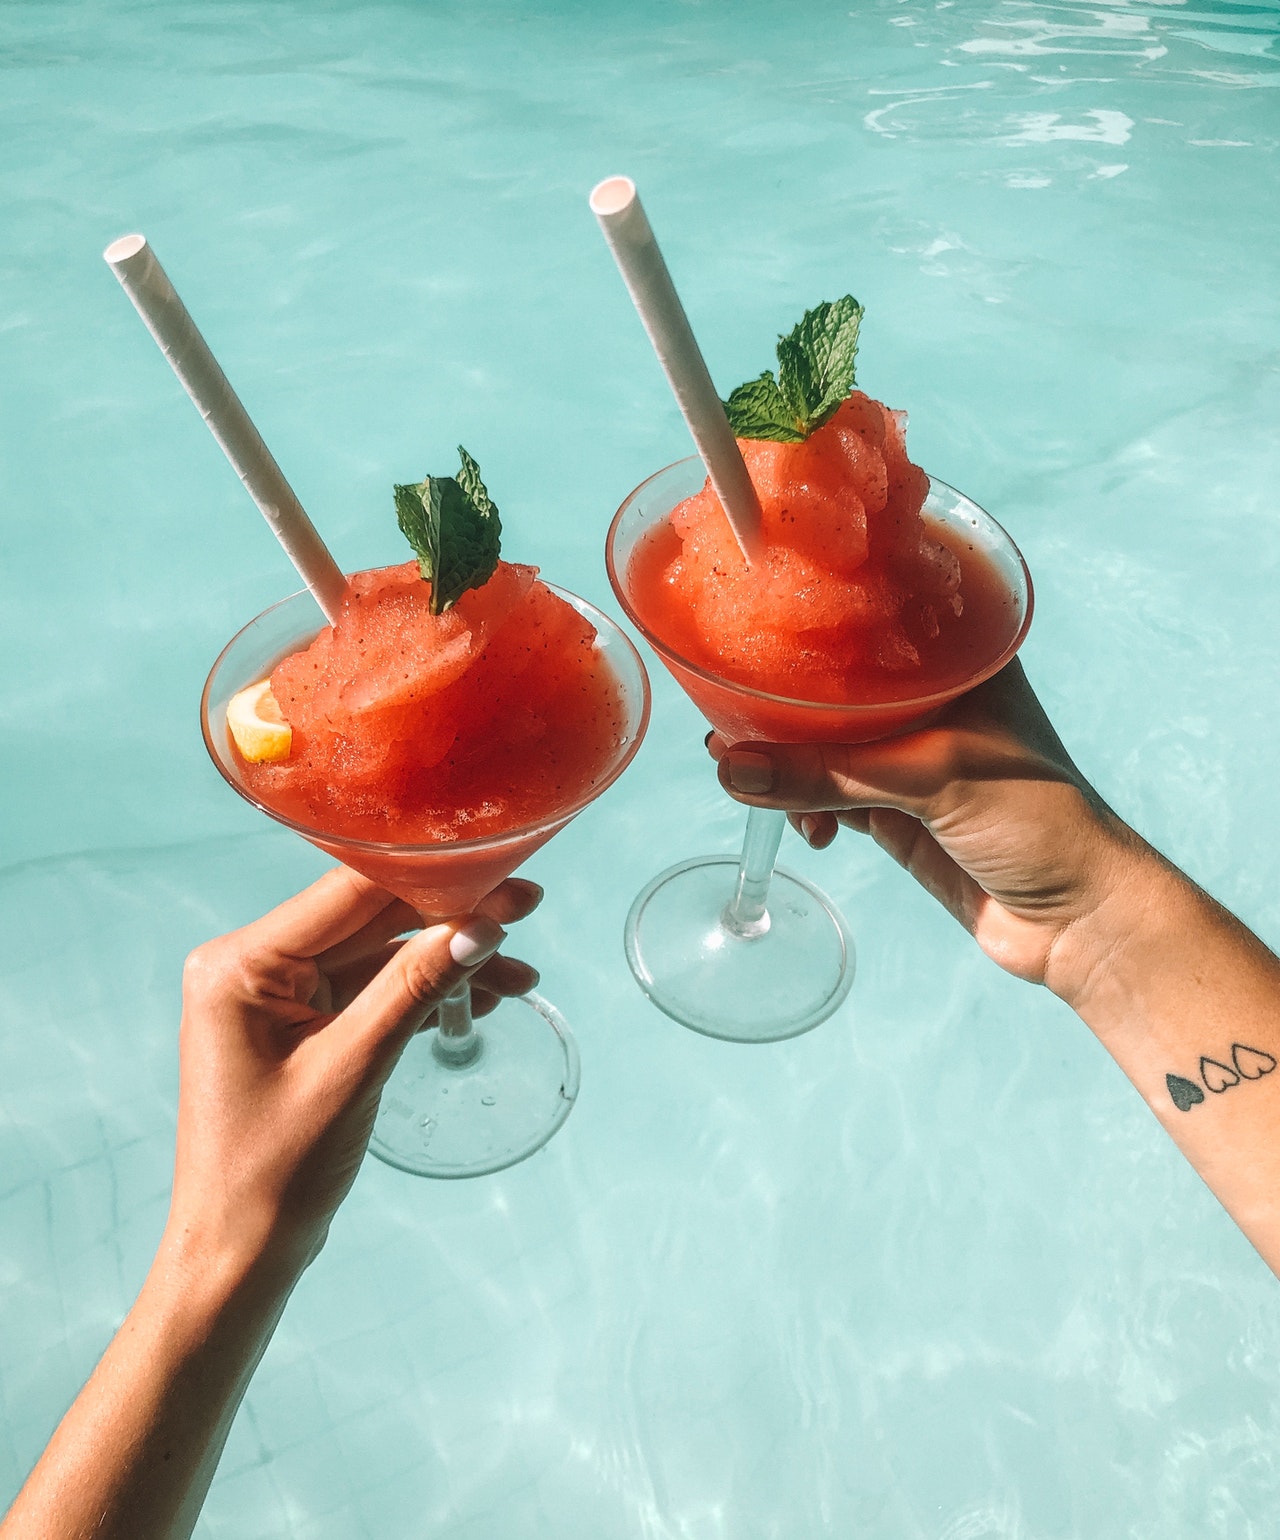 Two people cheers with frozen strawberry vodka slushies in front of a clear blue pool